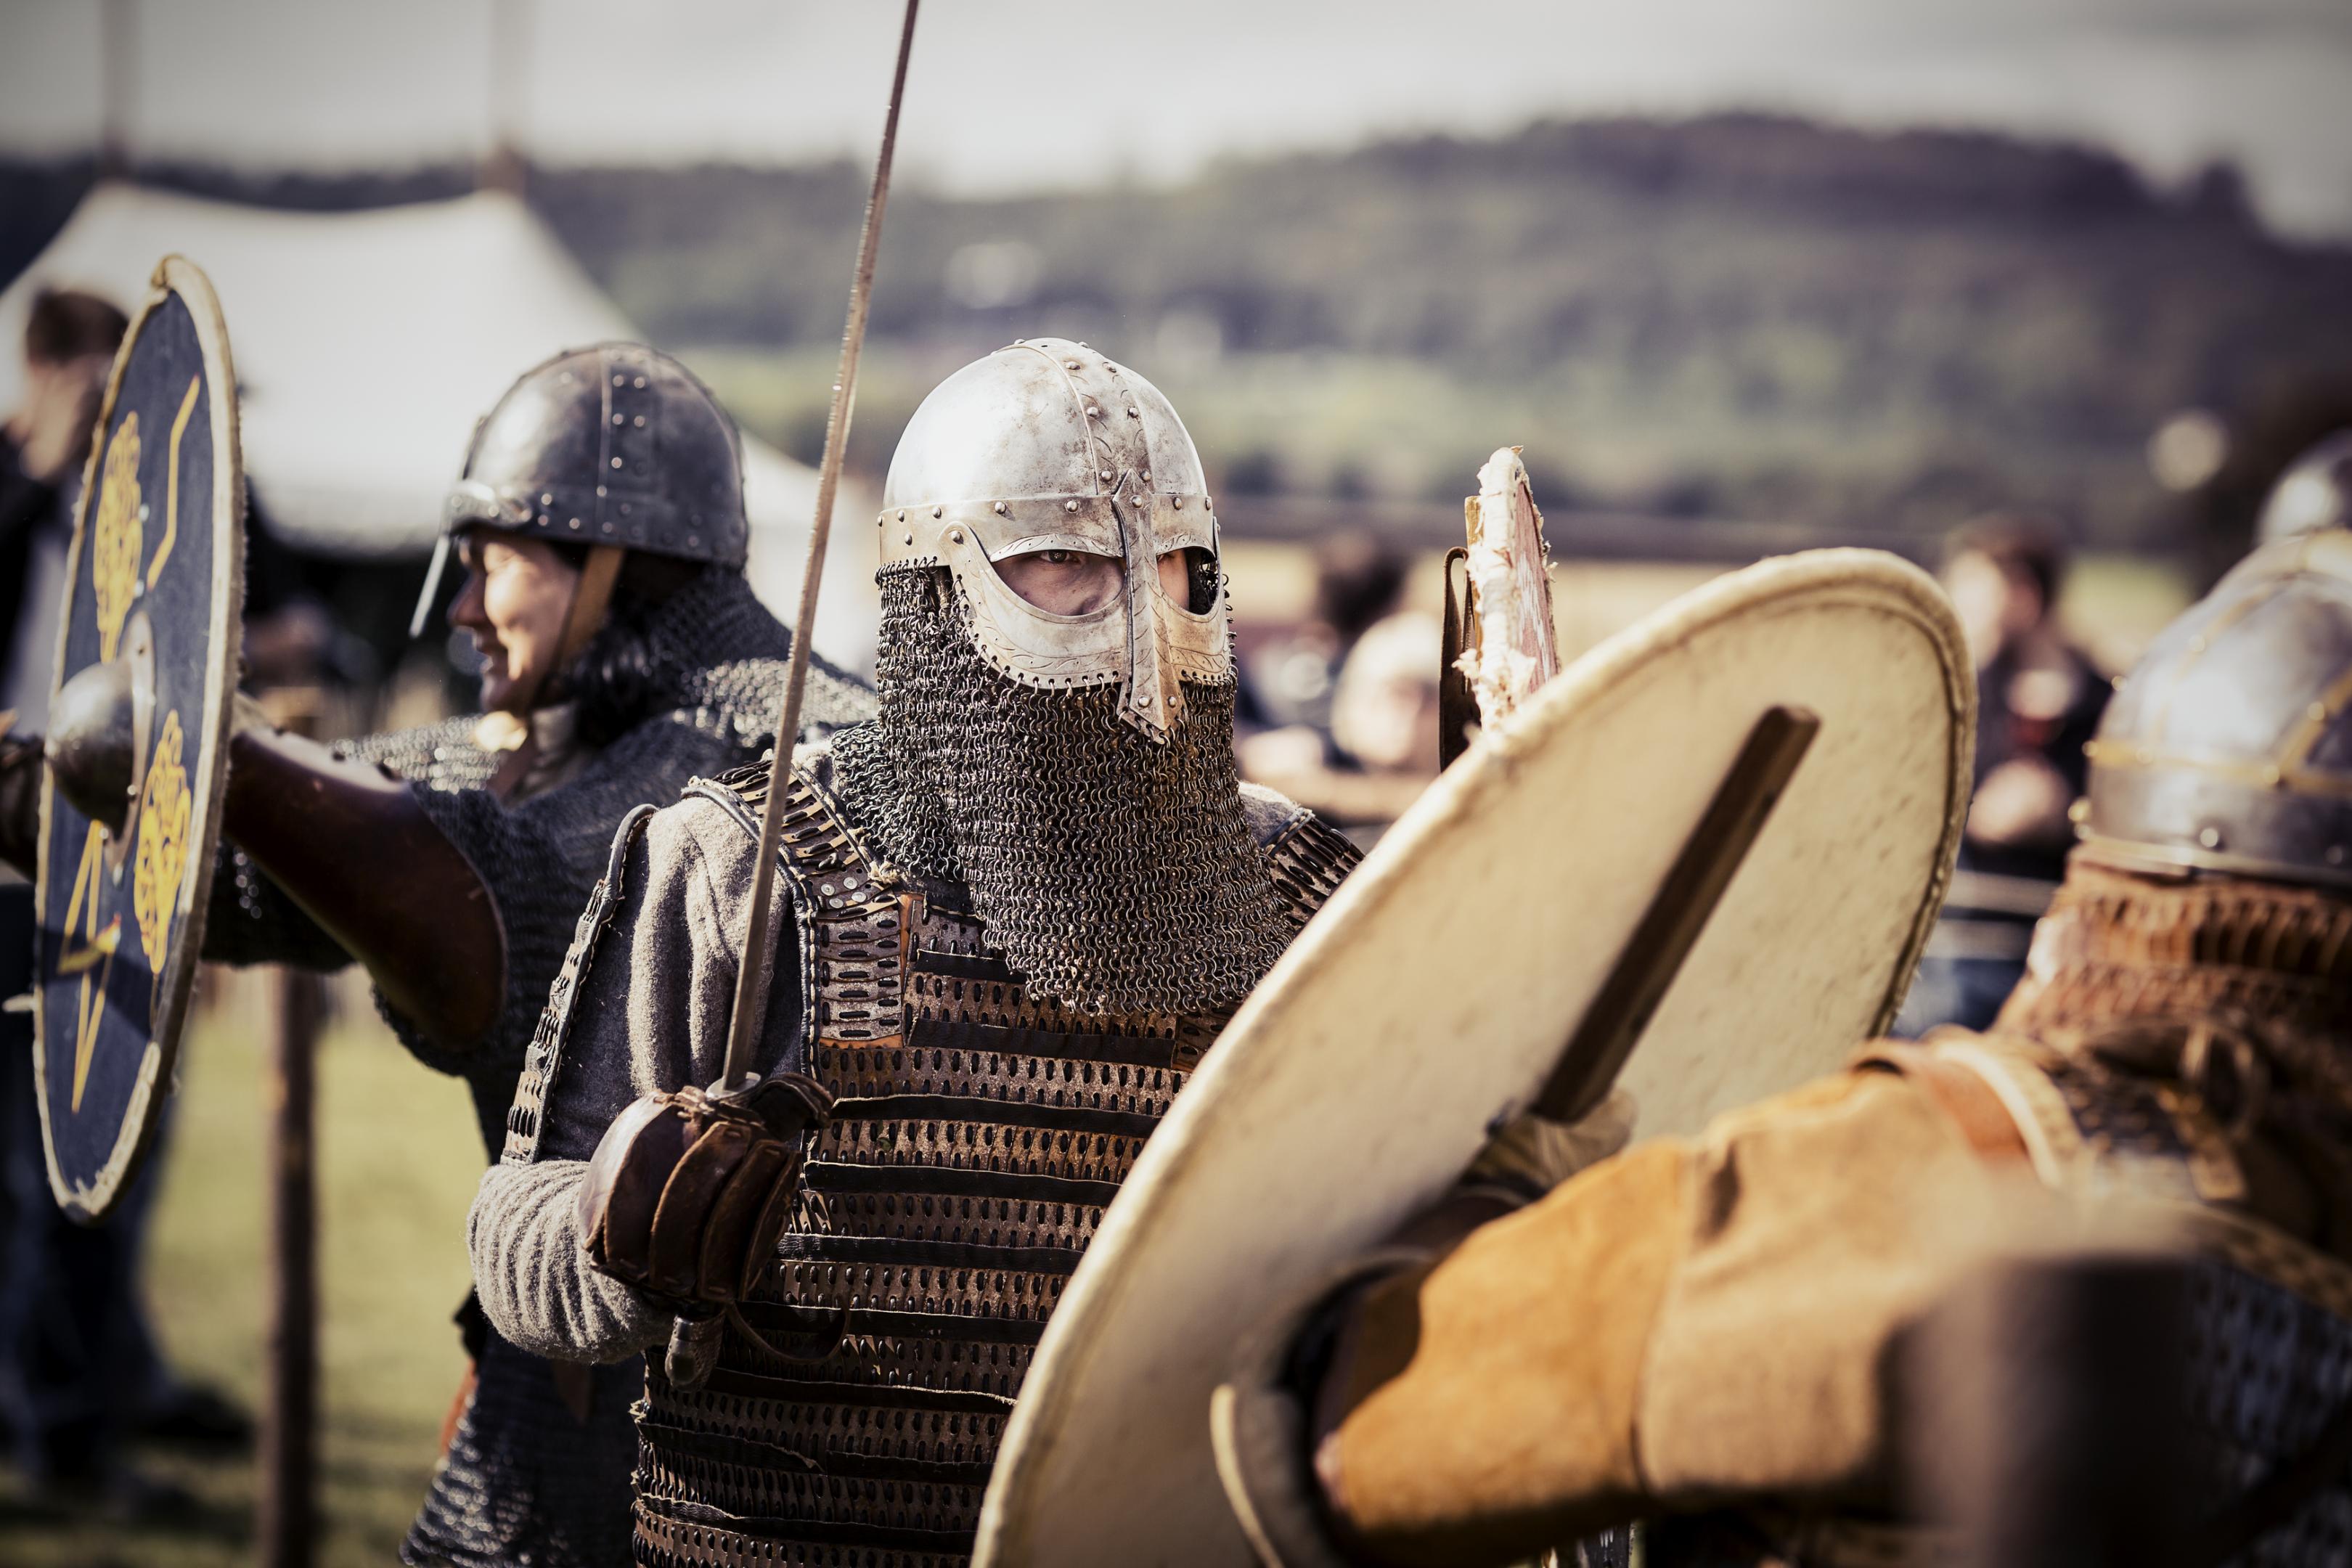 Vikings with sword and armour in a vikingvillage